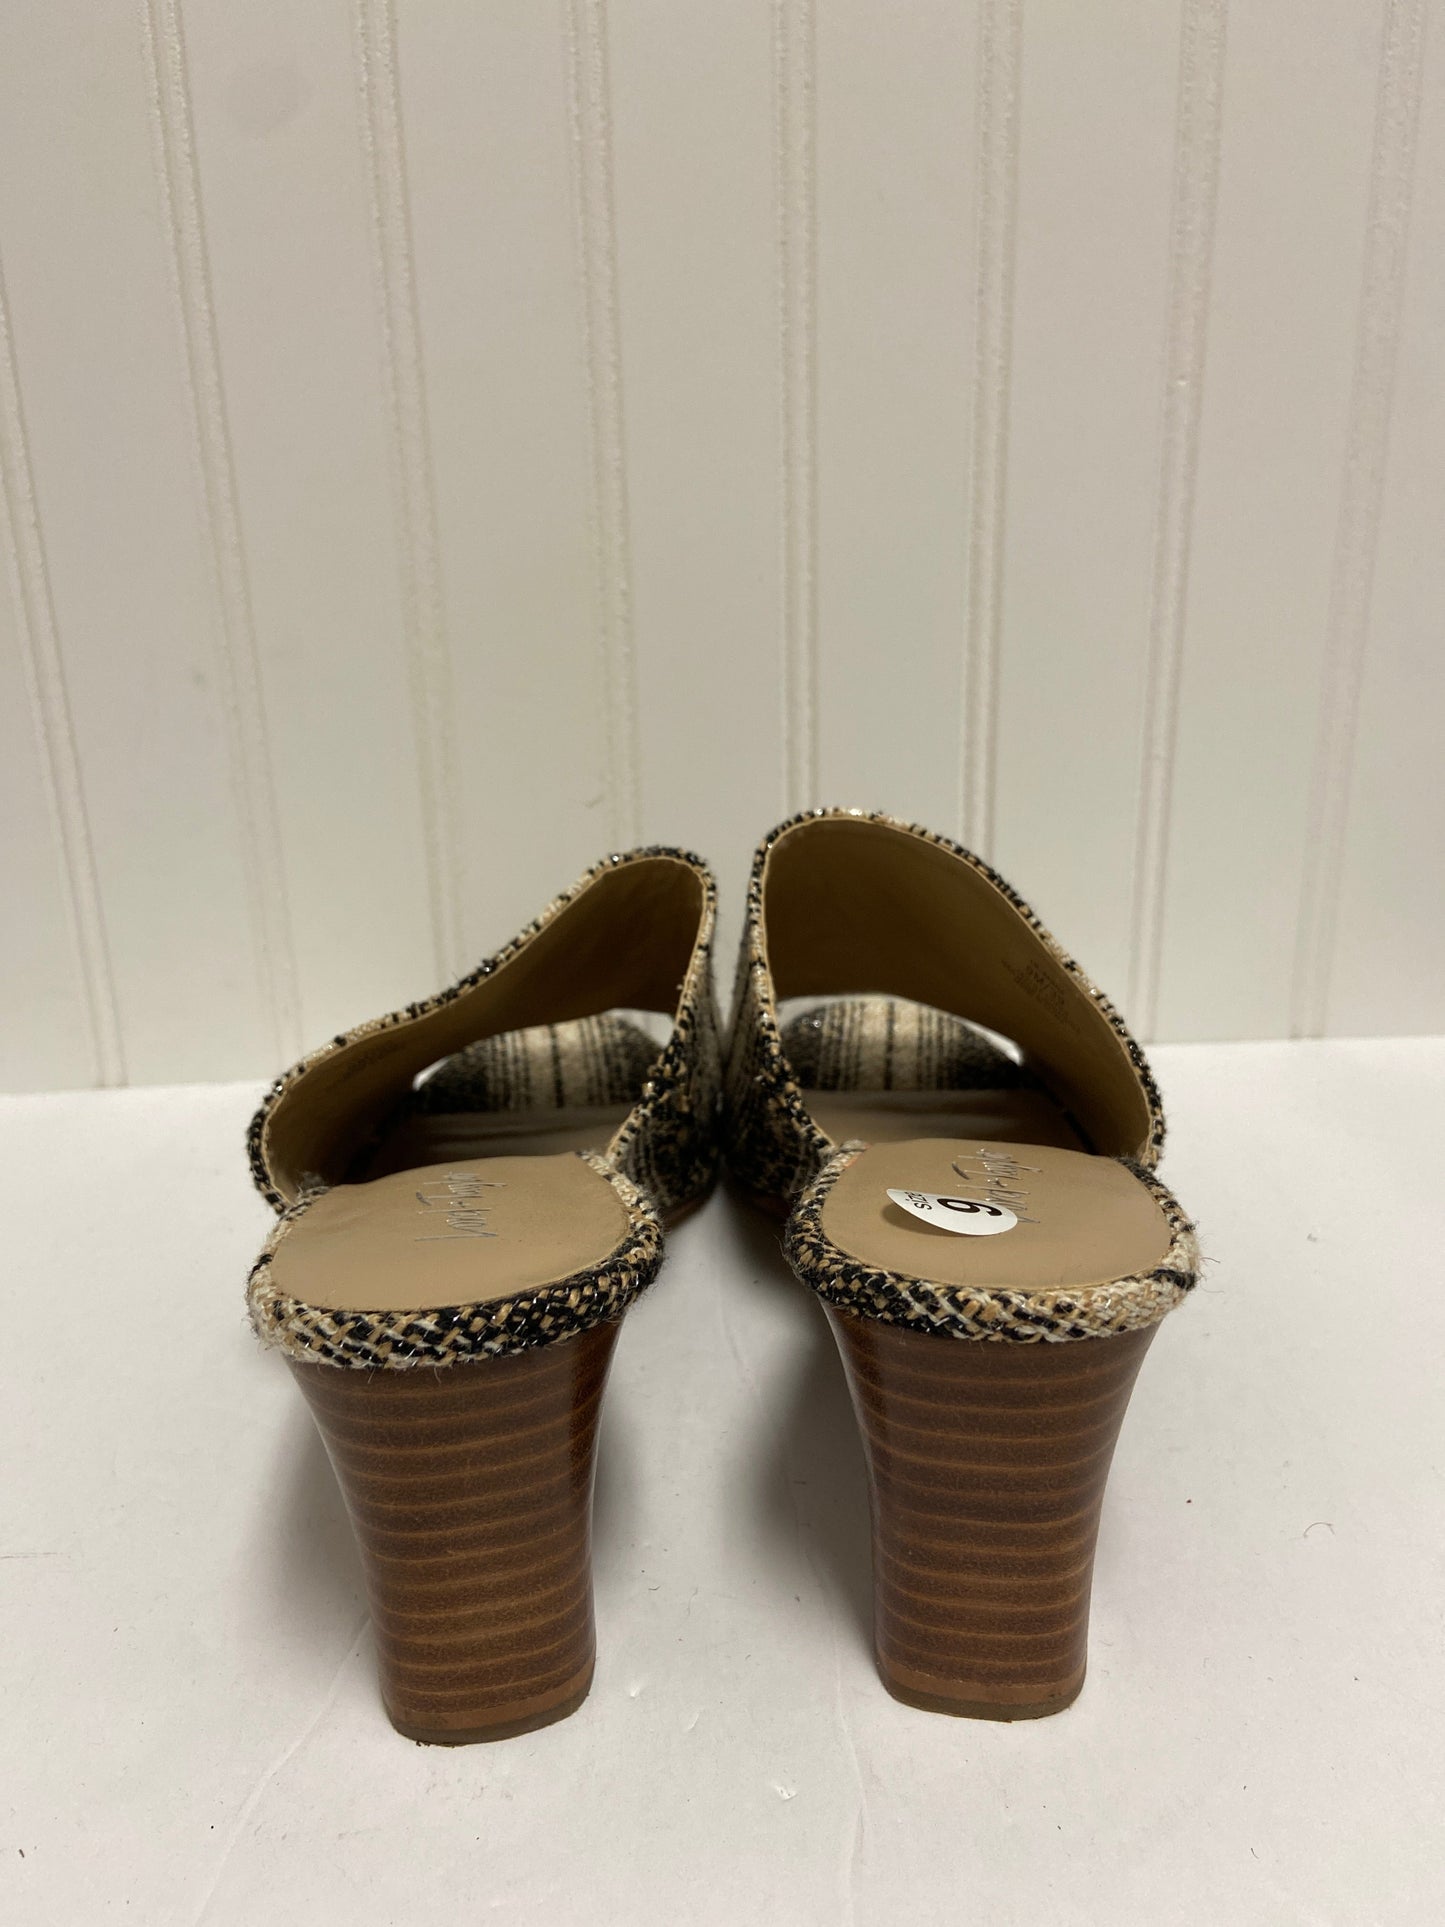 Sandals Heels Wedge By Lord And Taylor  Size: 9